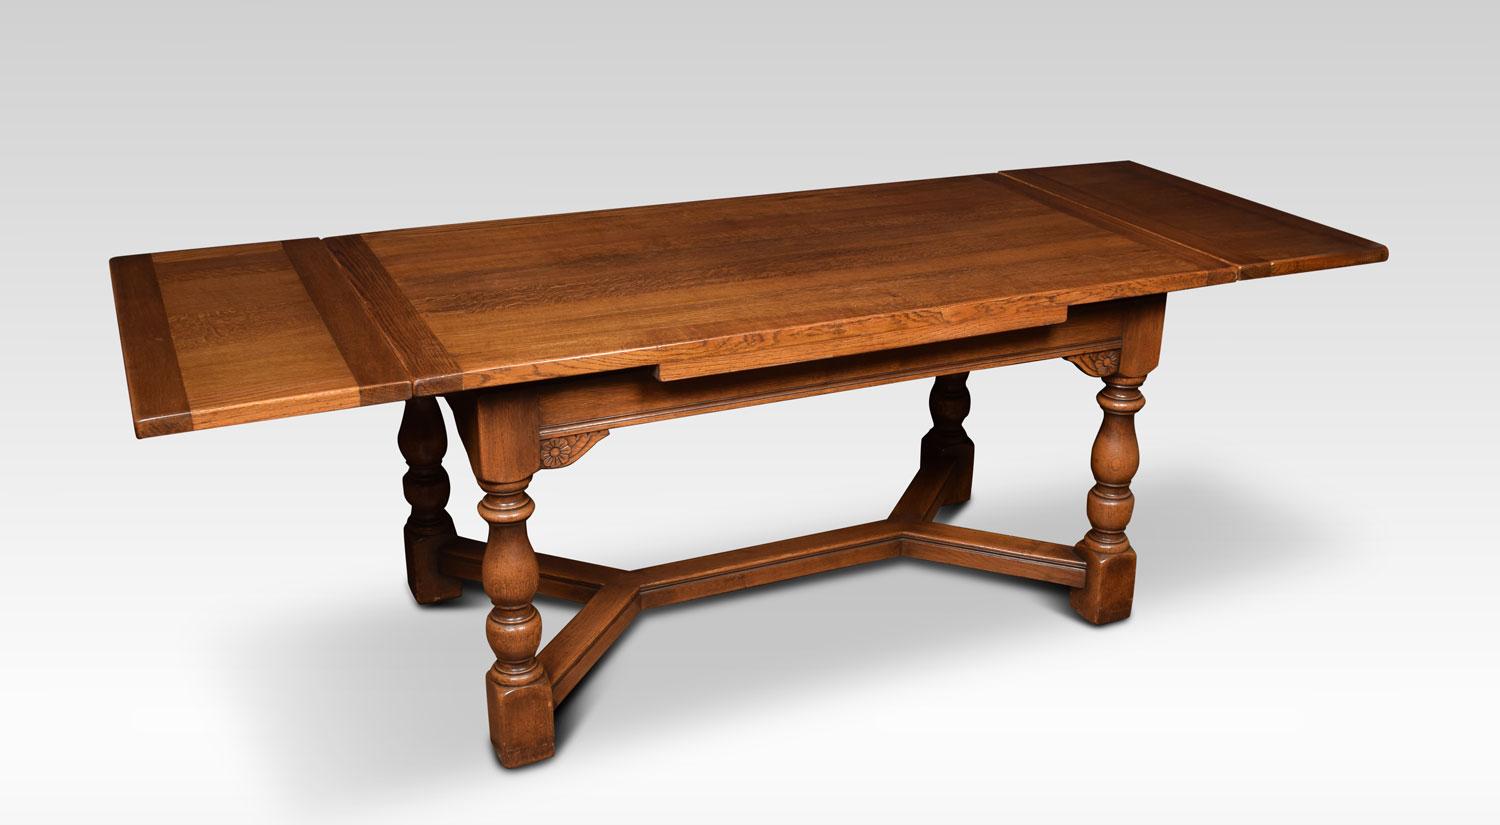 Oak draw leaf refectory table, the rectangular solid oak top above two pull out ends, raided up on turned tapering legs joined by a double Y-shaped stretcher.
Dimensions:
Height 30 inches
Length 60 inches when open 90 inches
Width 33 inches.